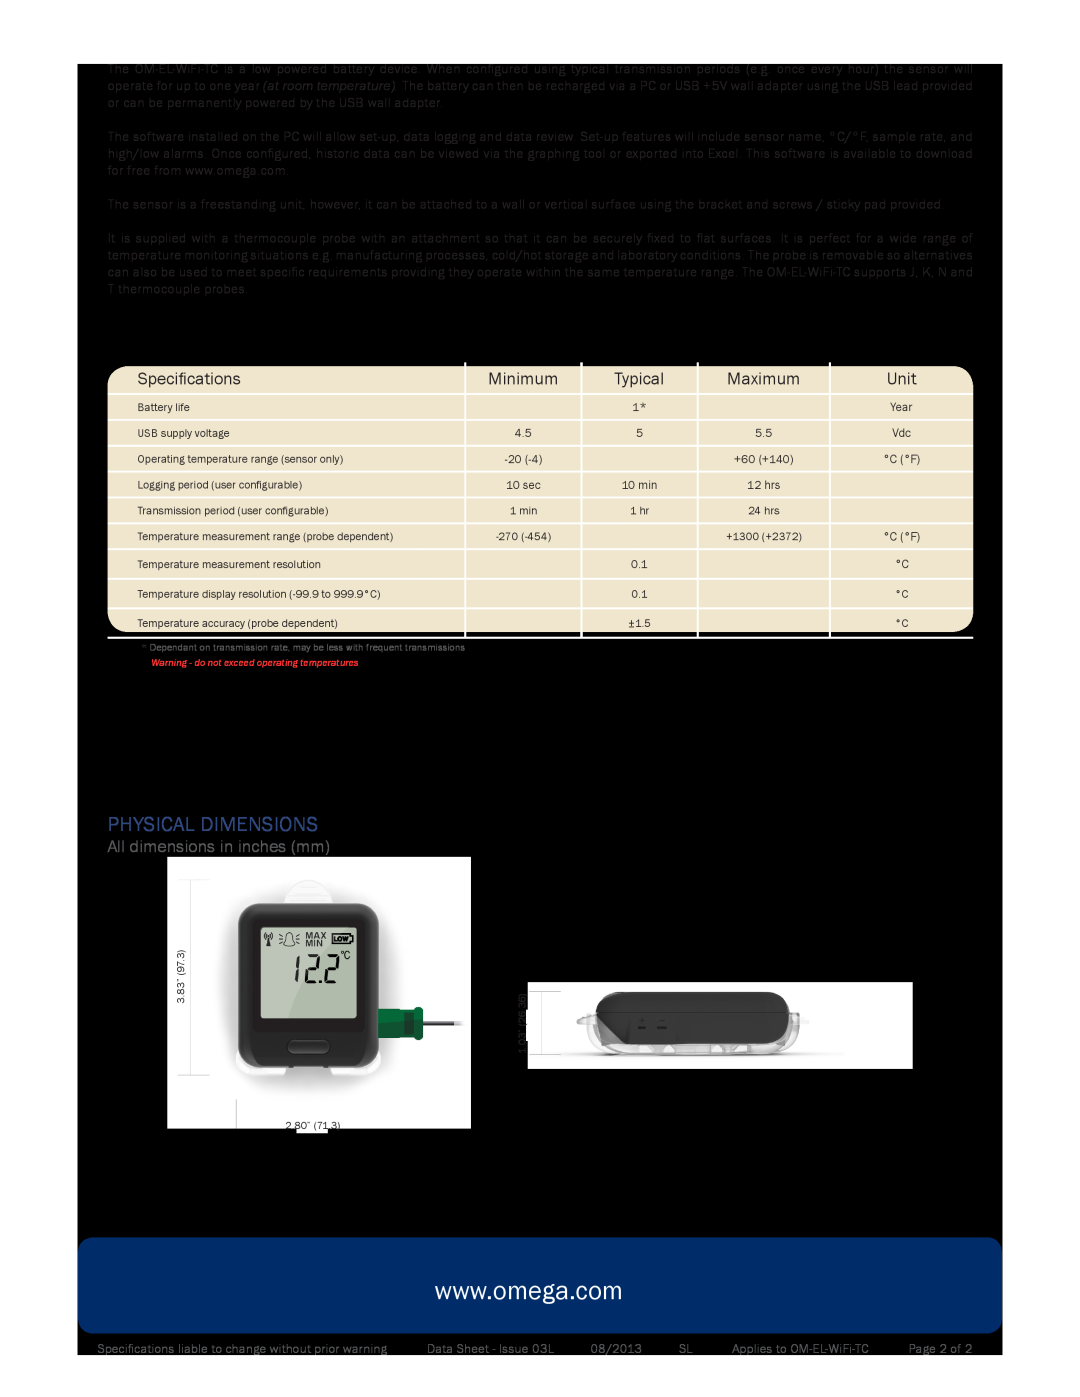 Omega Engineering ISO9001, ISD9001 warranty Physical Dimensions, Specifications, Minimum, Typical, Maximum, Unit 